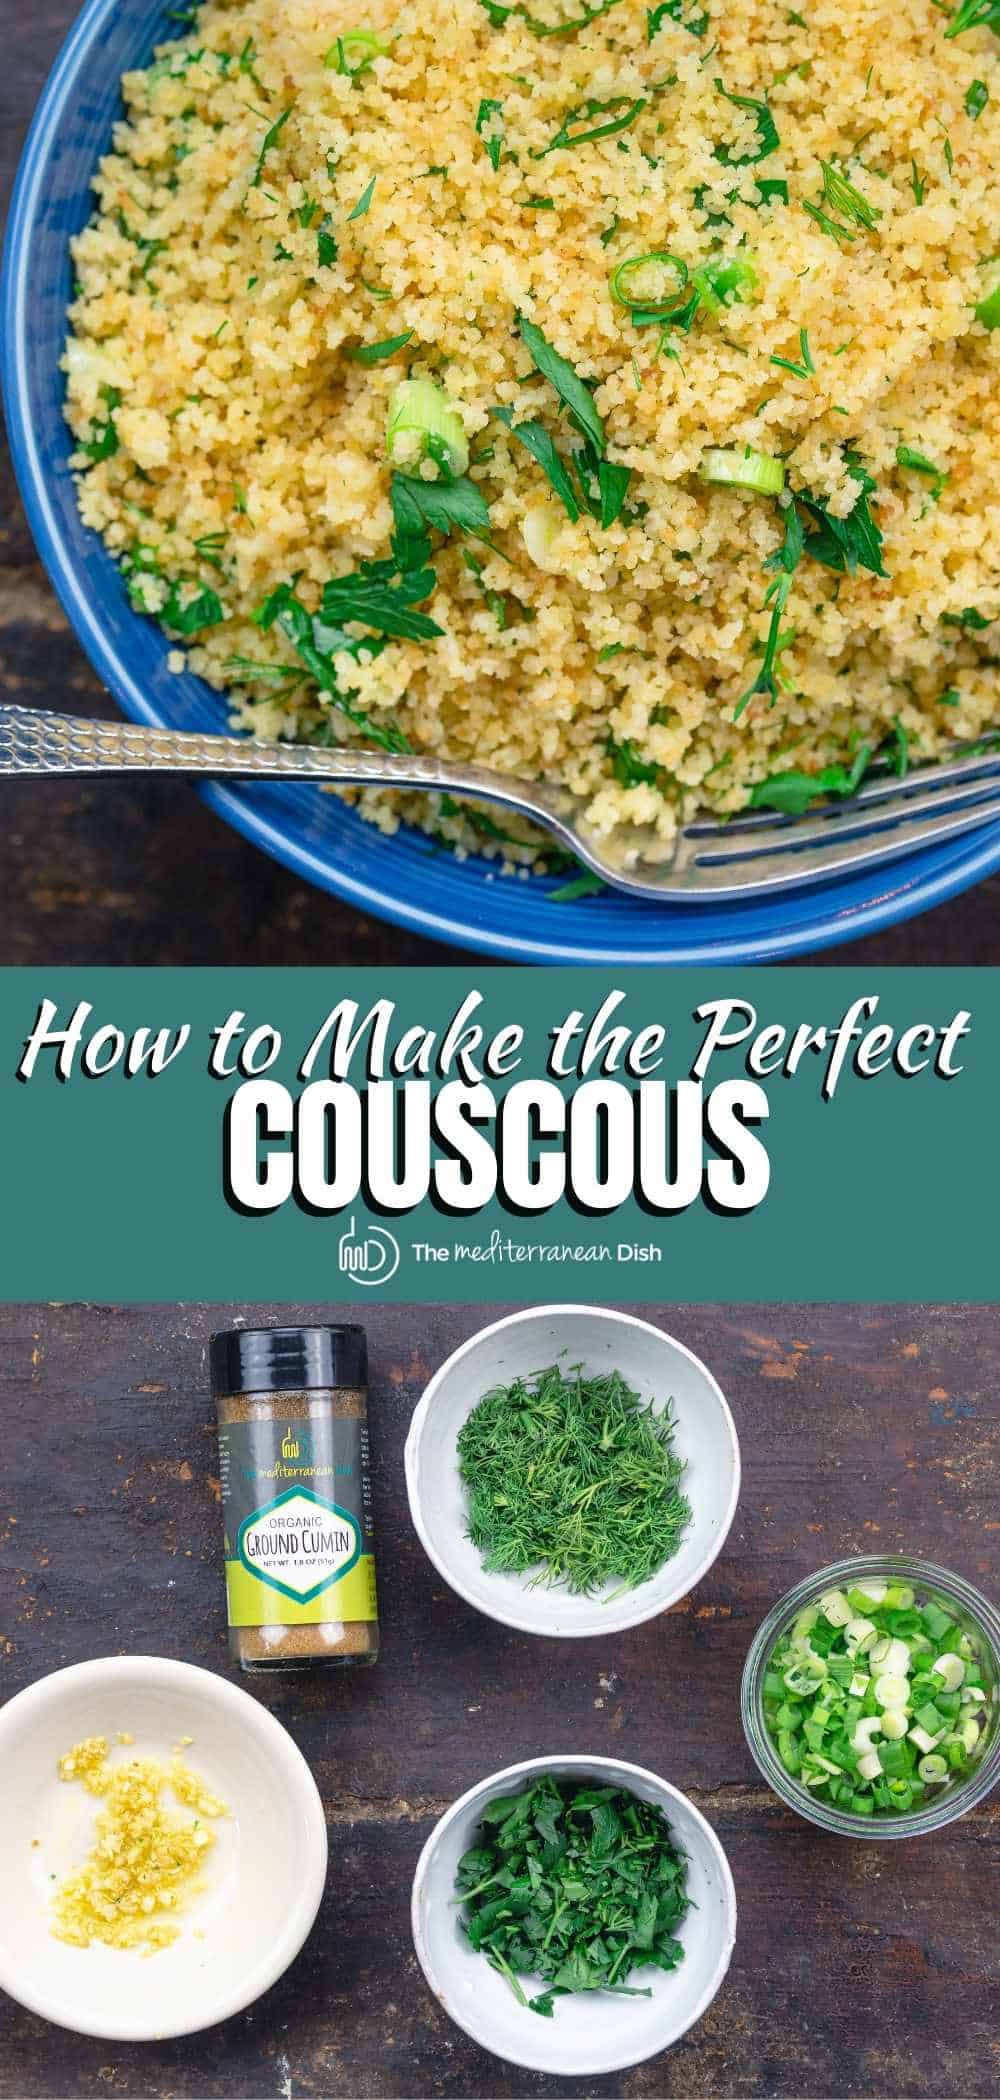 How to Cook Couscous Perfectly (Recipe & Tips) | The Mediterranean Dish